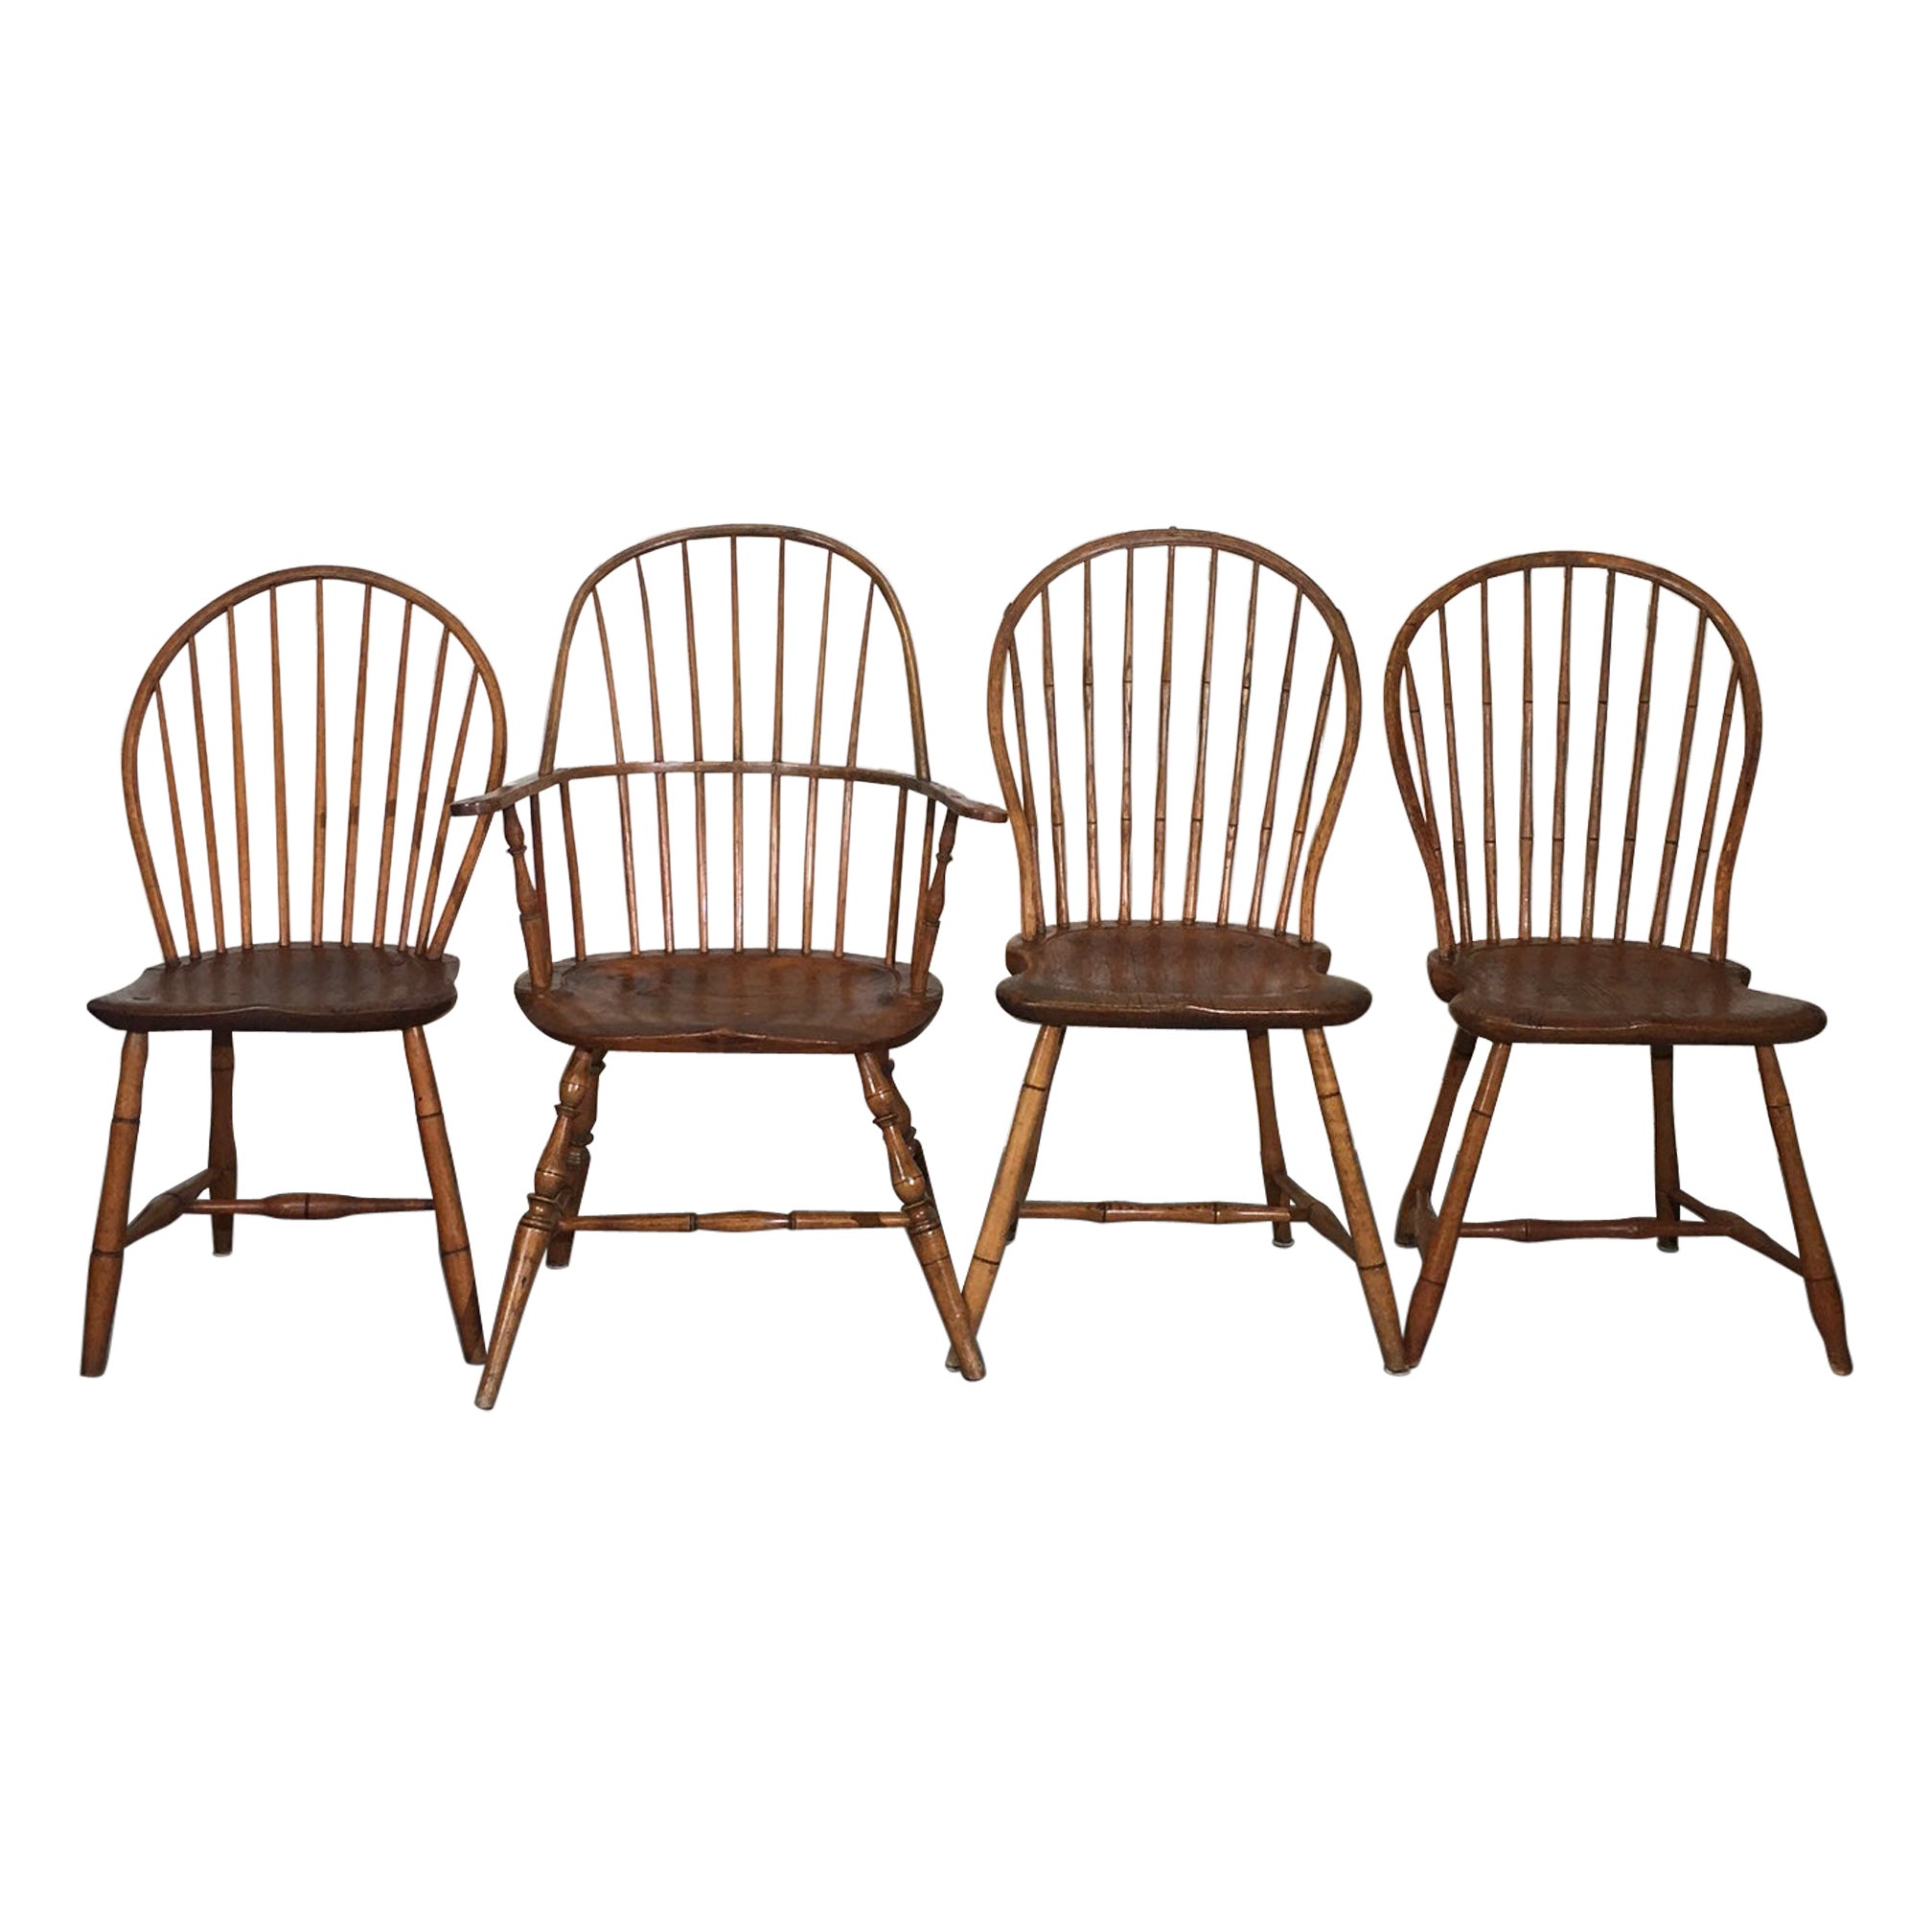 Rustic Chairs Set of 4